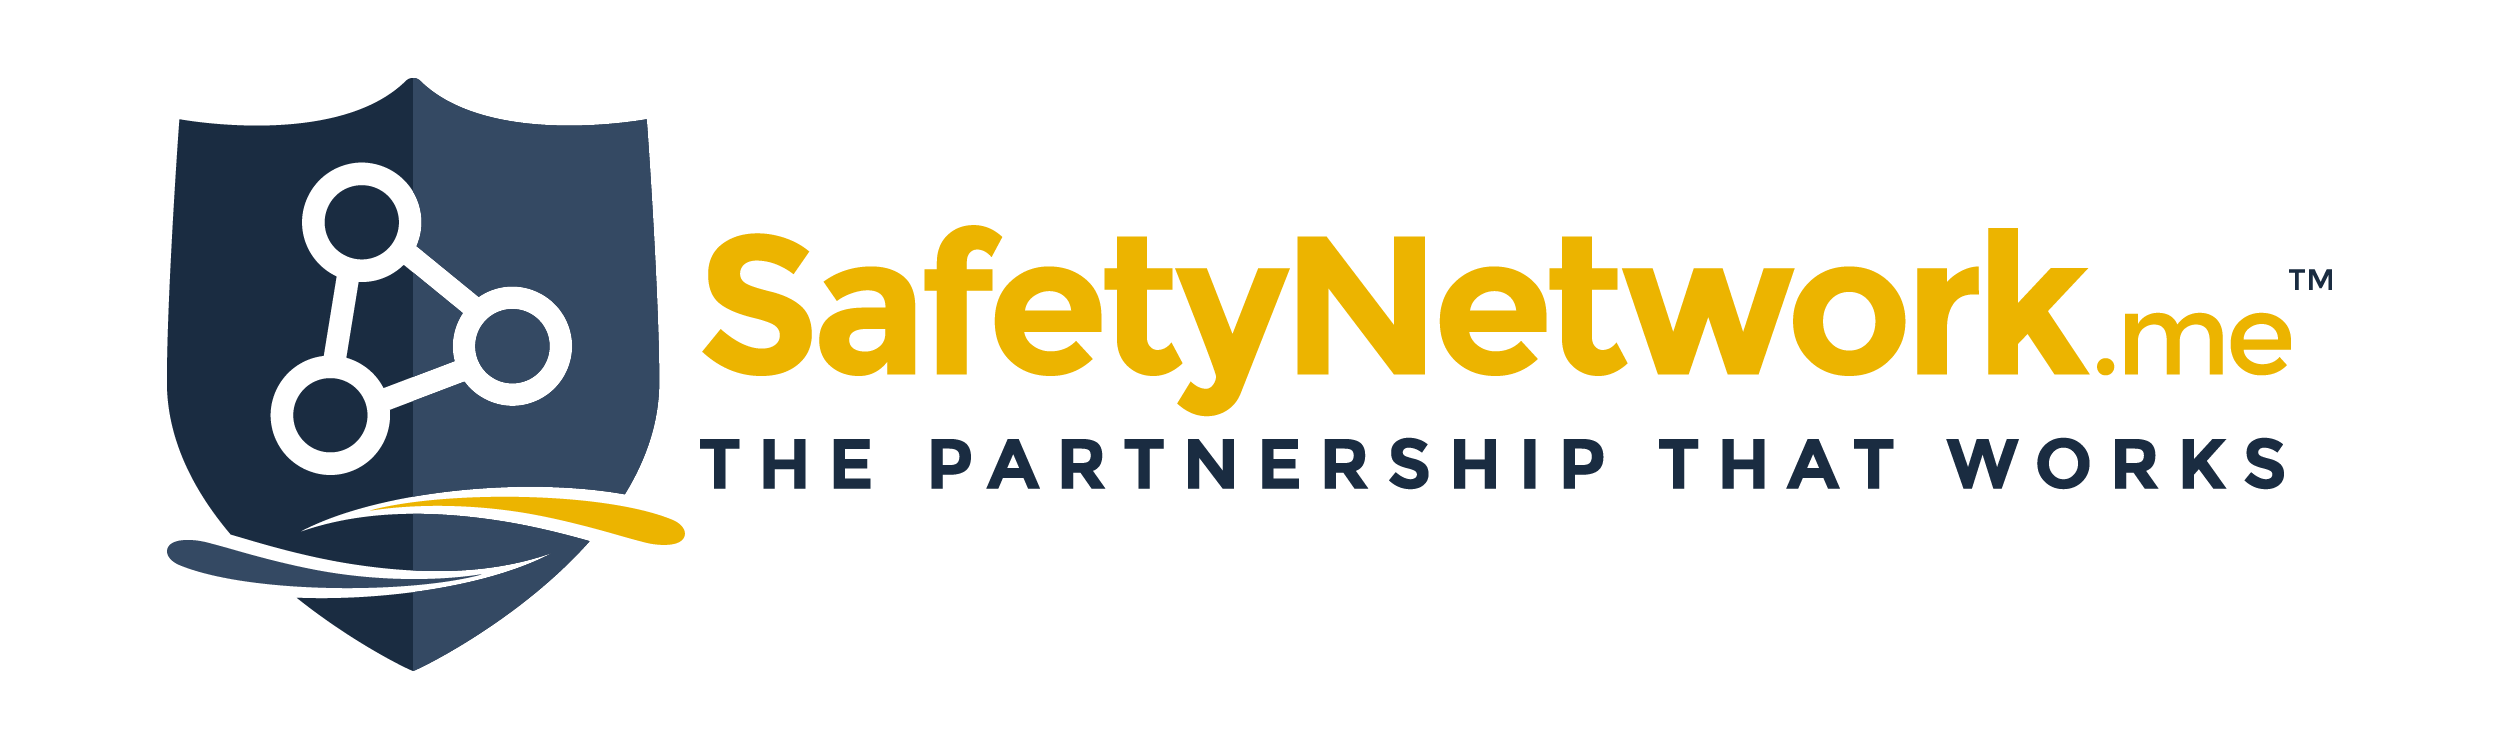 SafetyNetwork.me The Partnership That Works logo